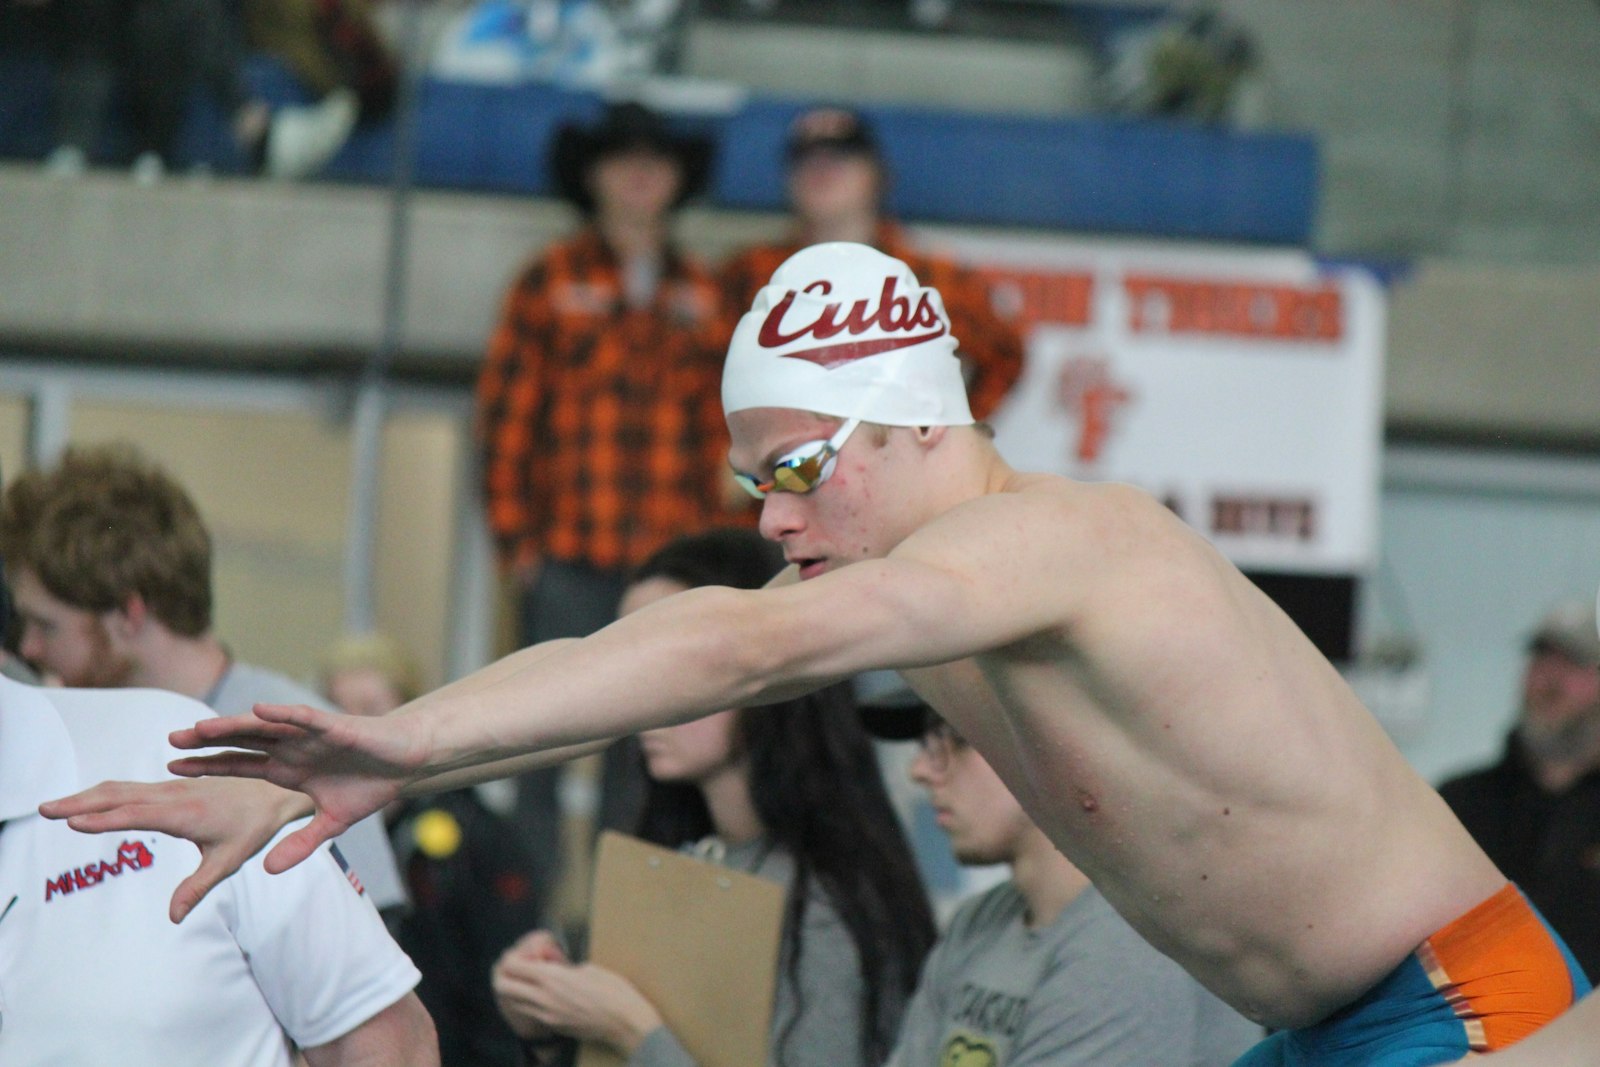 Senior Drew Collins gets ready to enter the water for his leg of the 400 freestyle relay. Earlier, he won the individual medley and finished second in the backstroke.